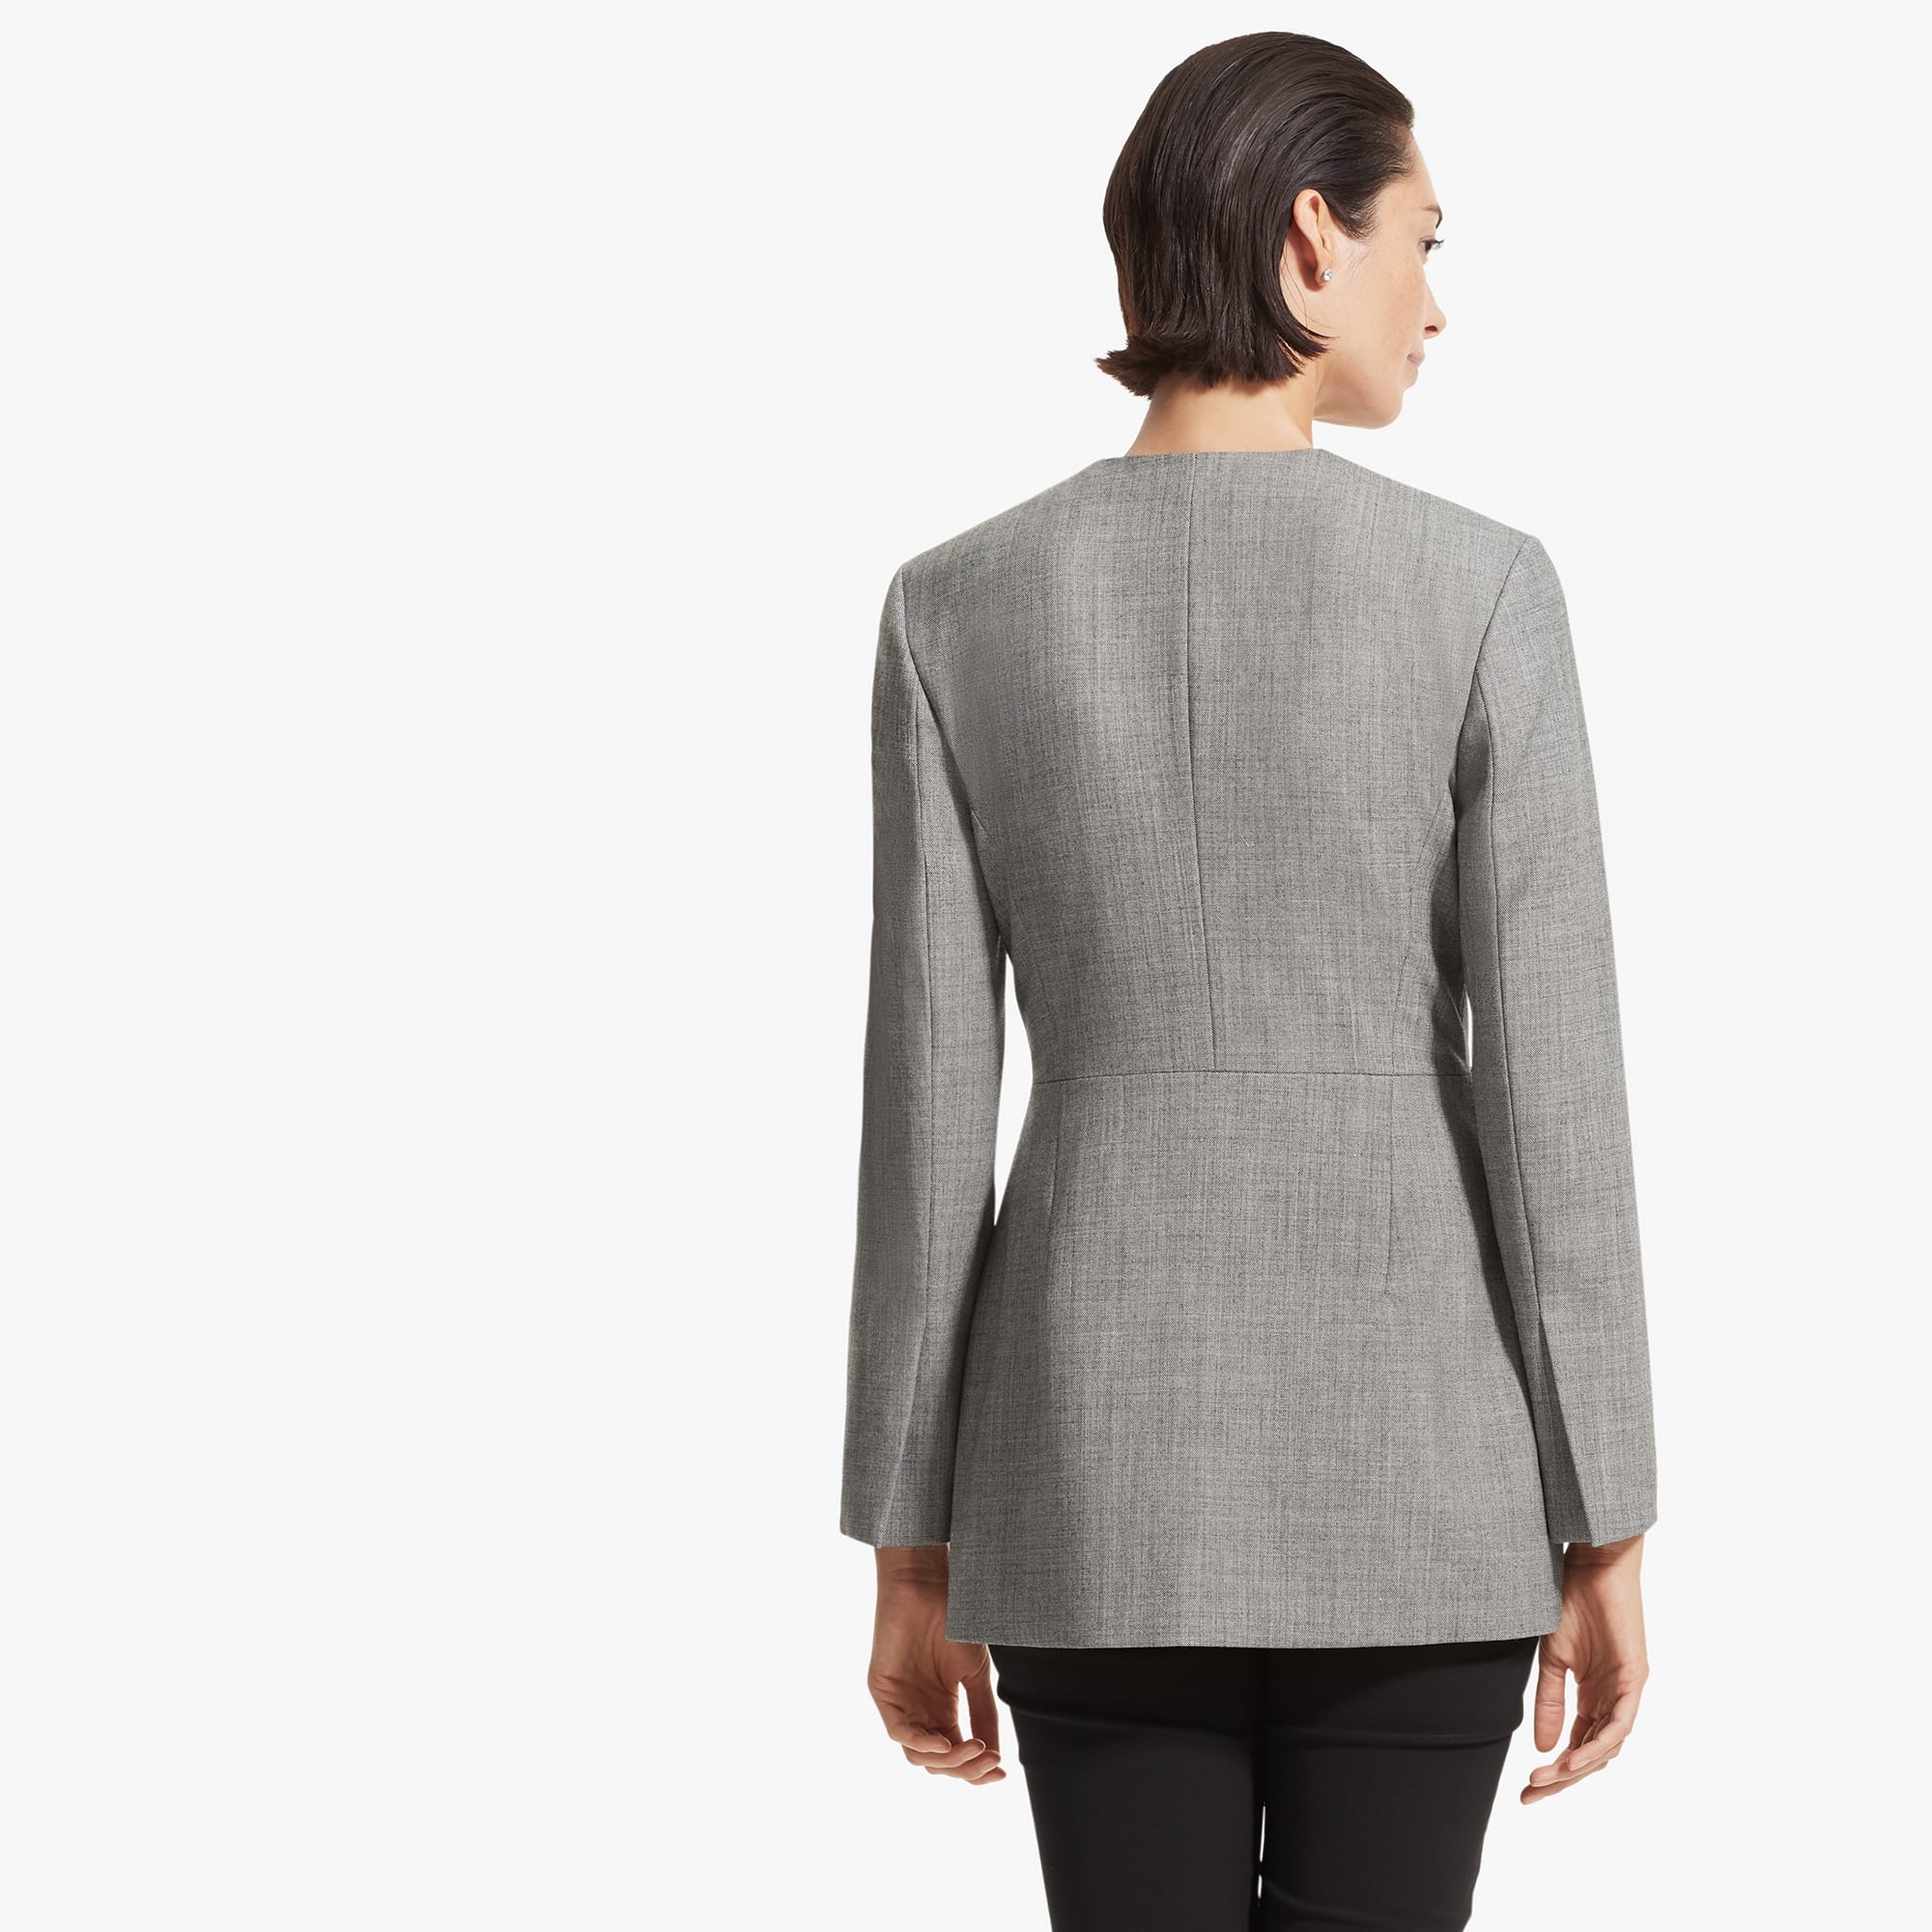 Back image of a woman standing wearing the Carmen jacket sharkskin in Black and white